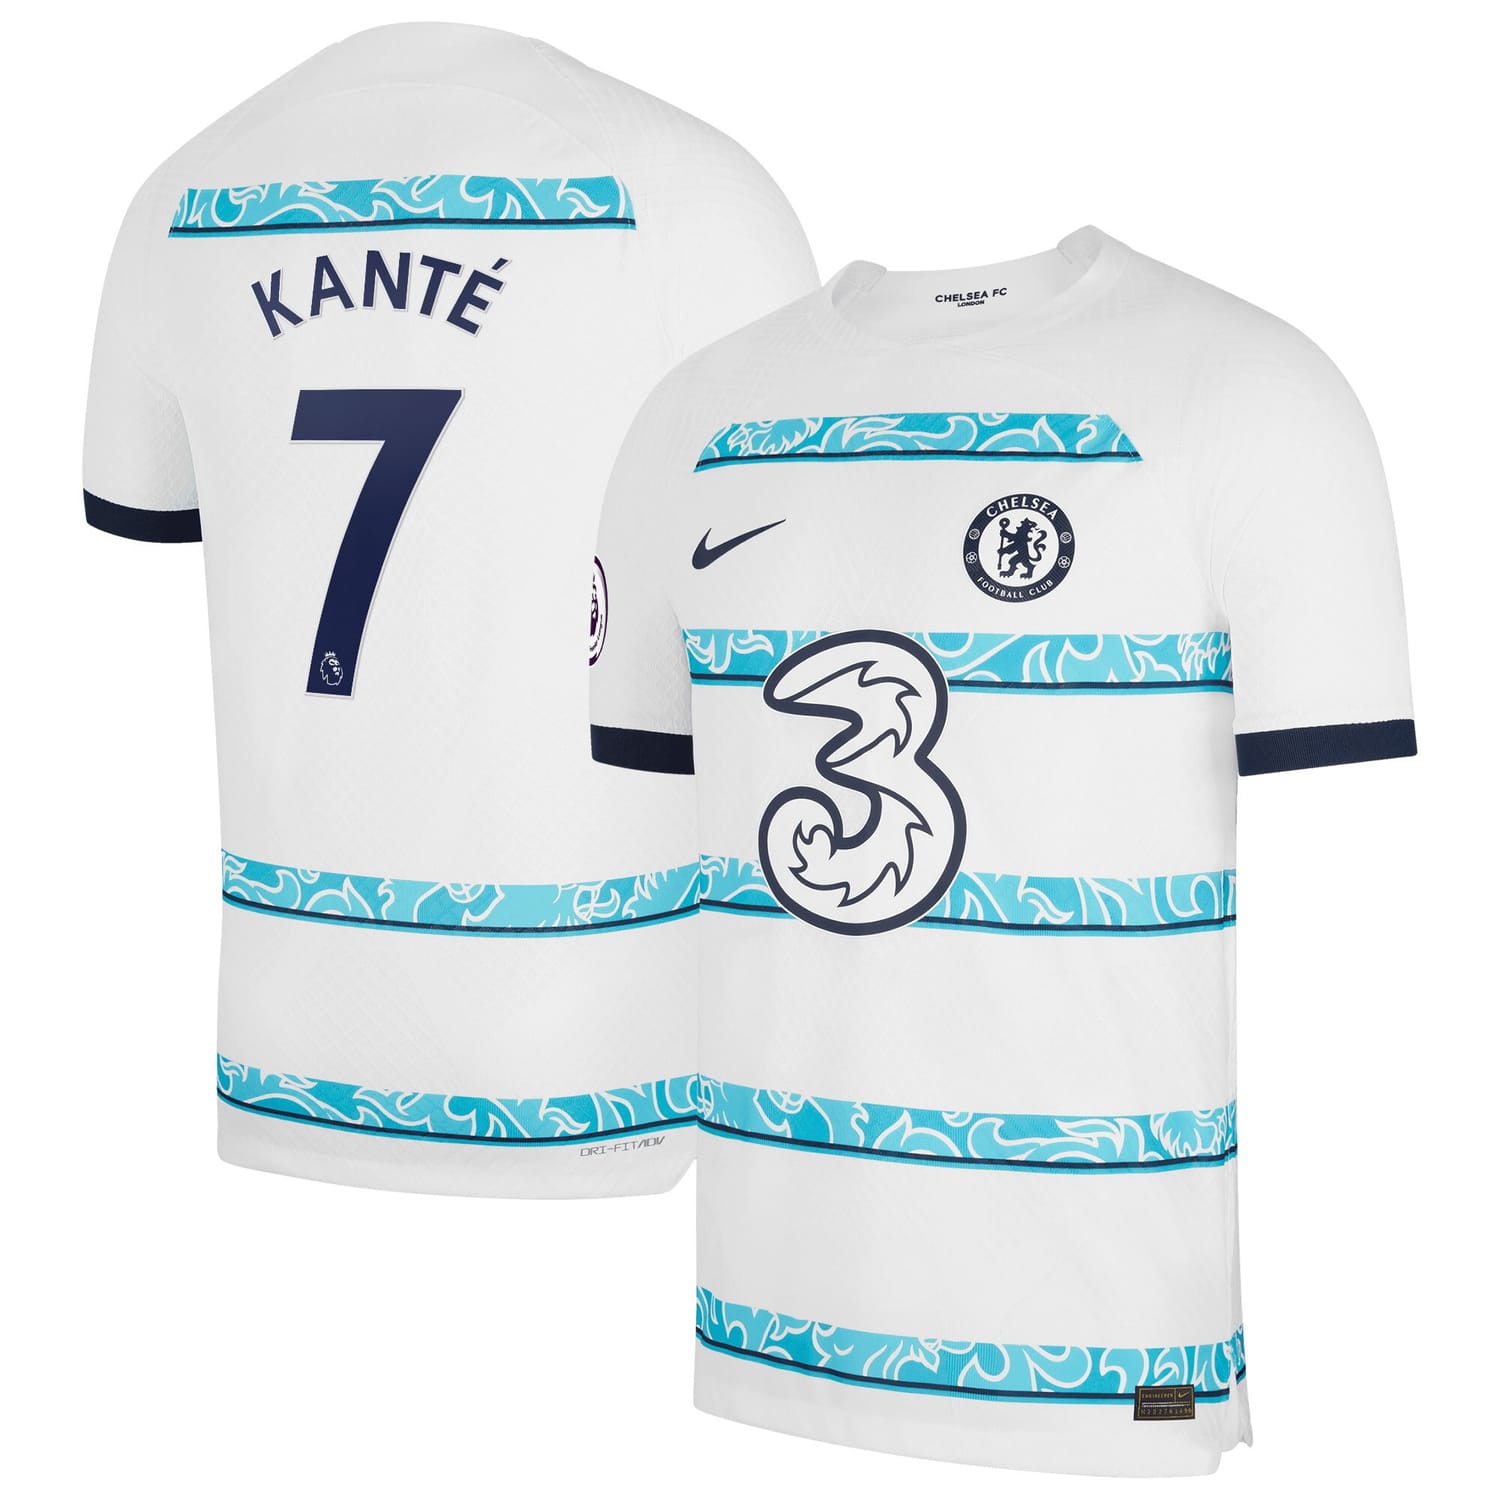 Premier League Chelsea Away Authentic Jersey Shirt White 2022-23 player N'Golo Kante printing for Men